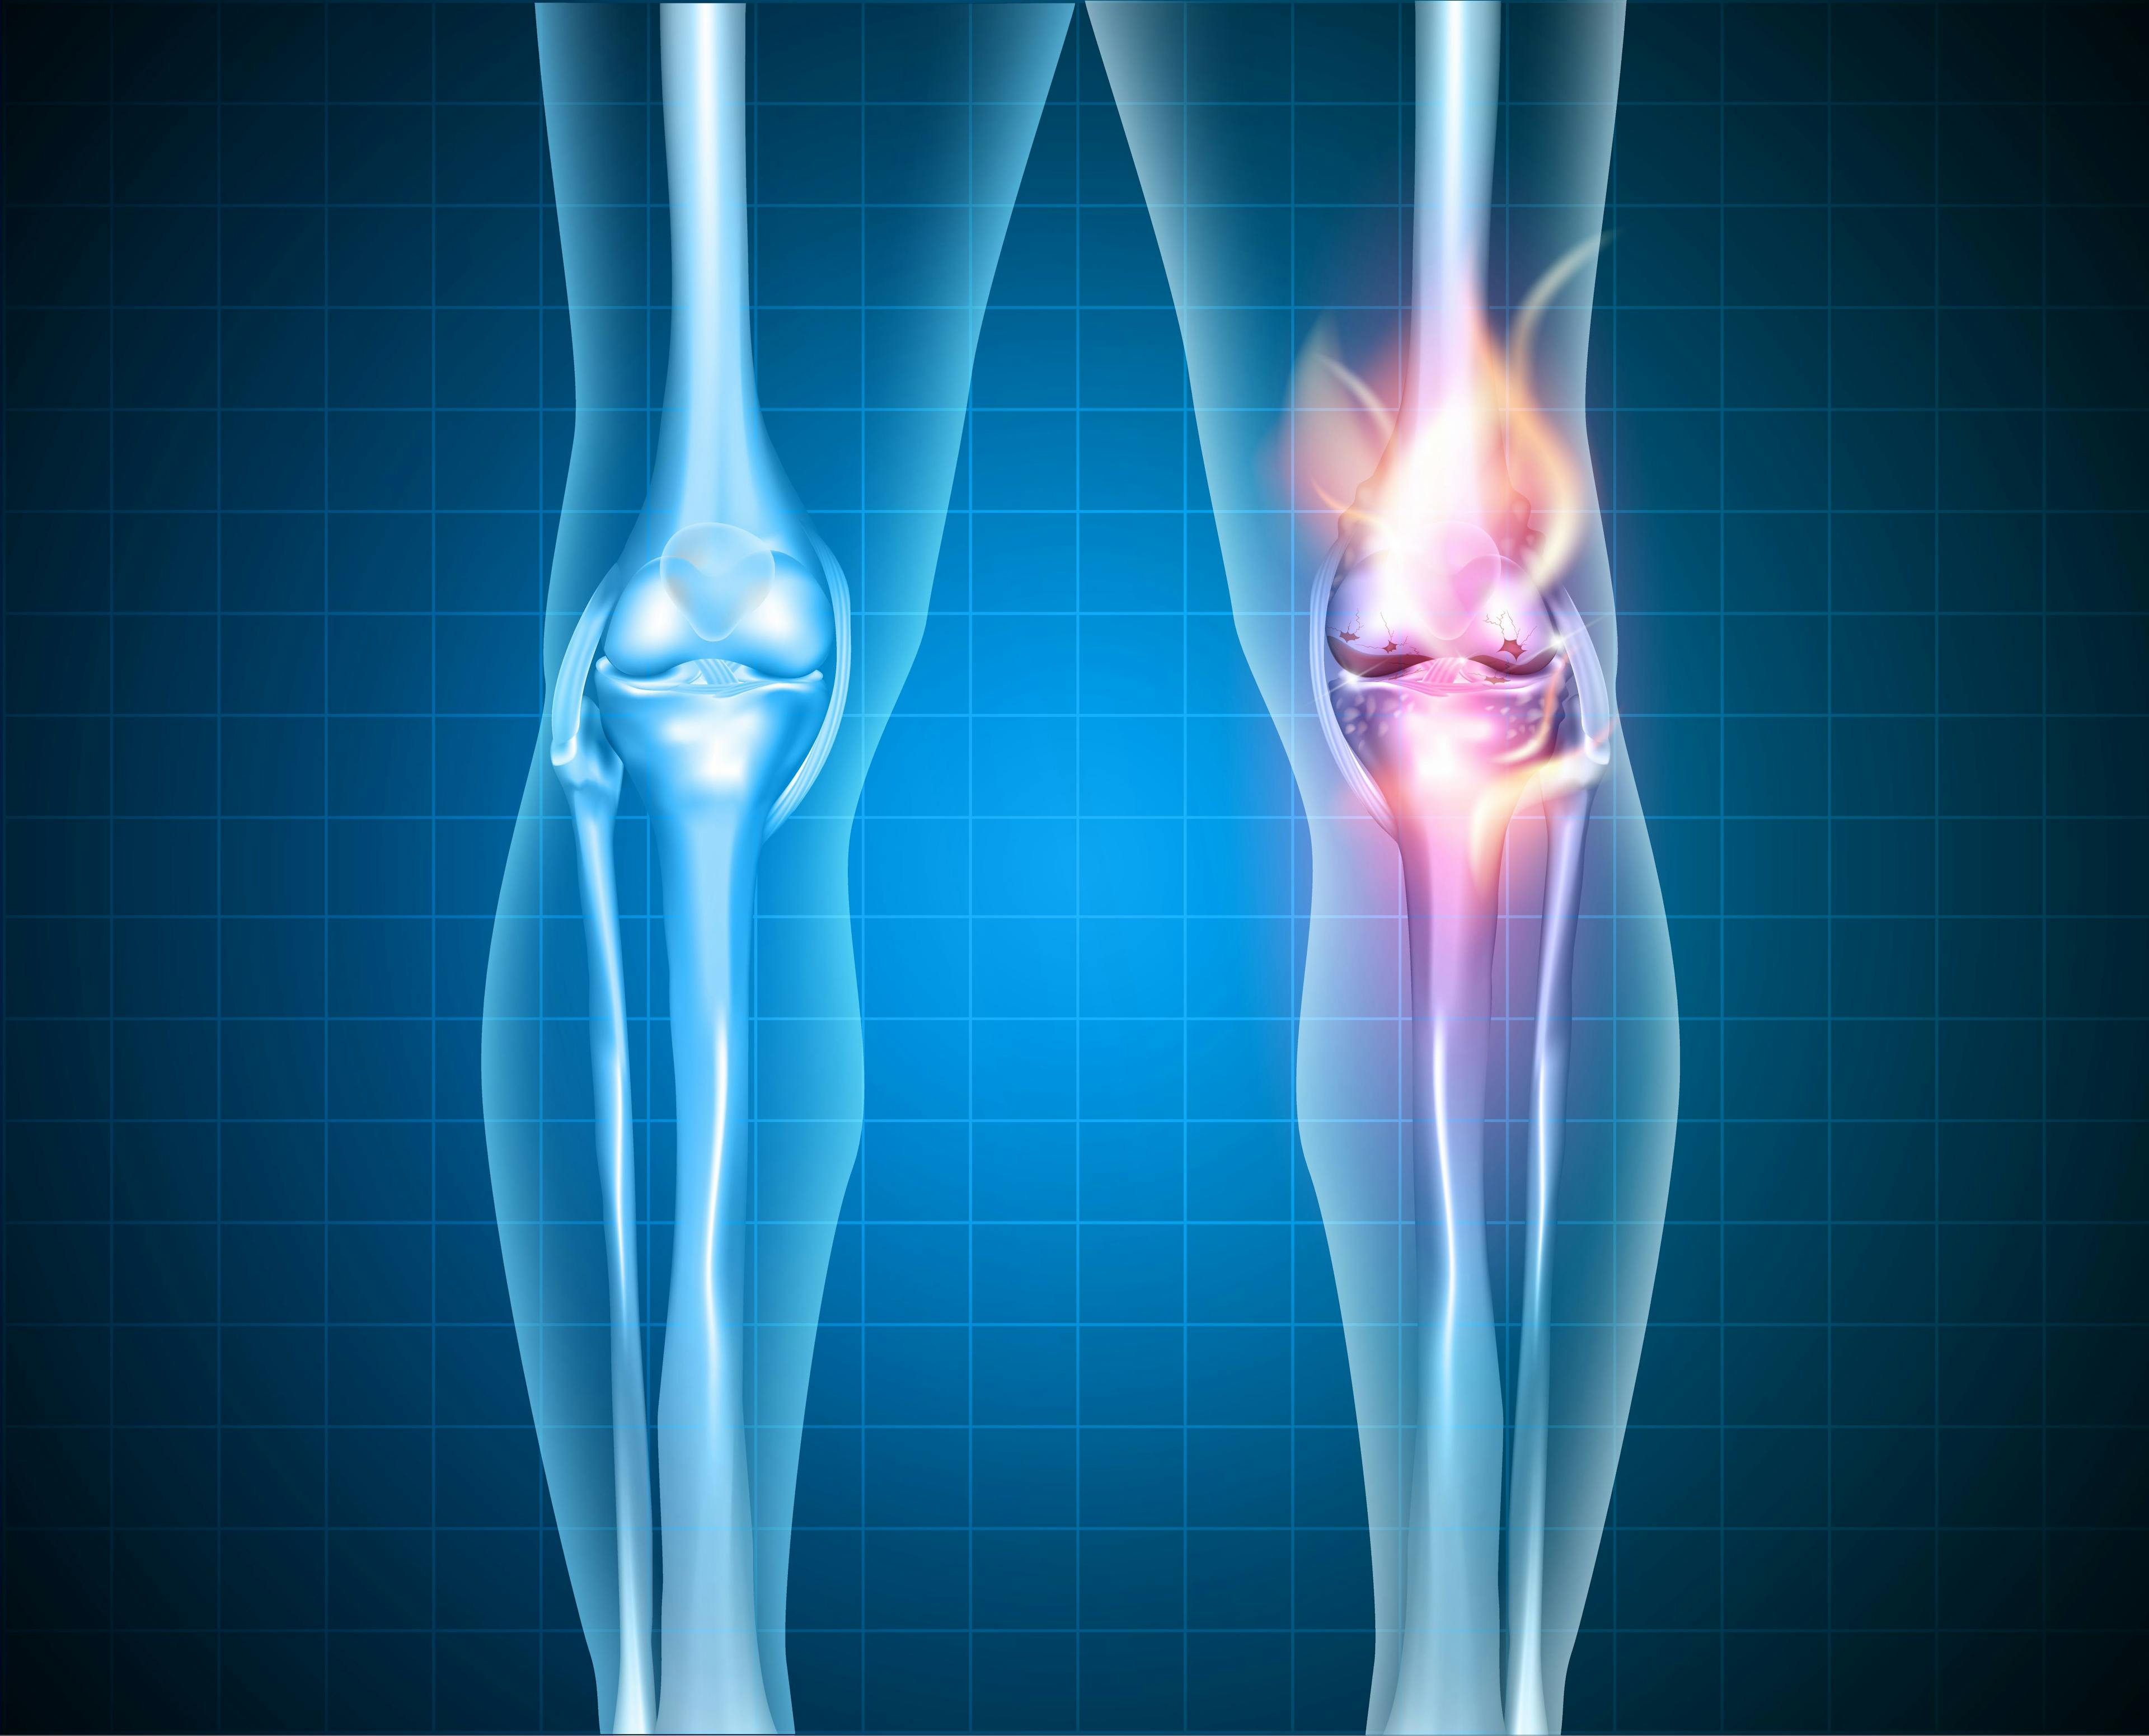 Low-Dose Radiation Therapy for Knee, Hand Osteoarthritis Questioned